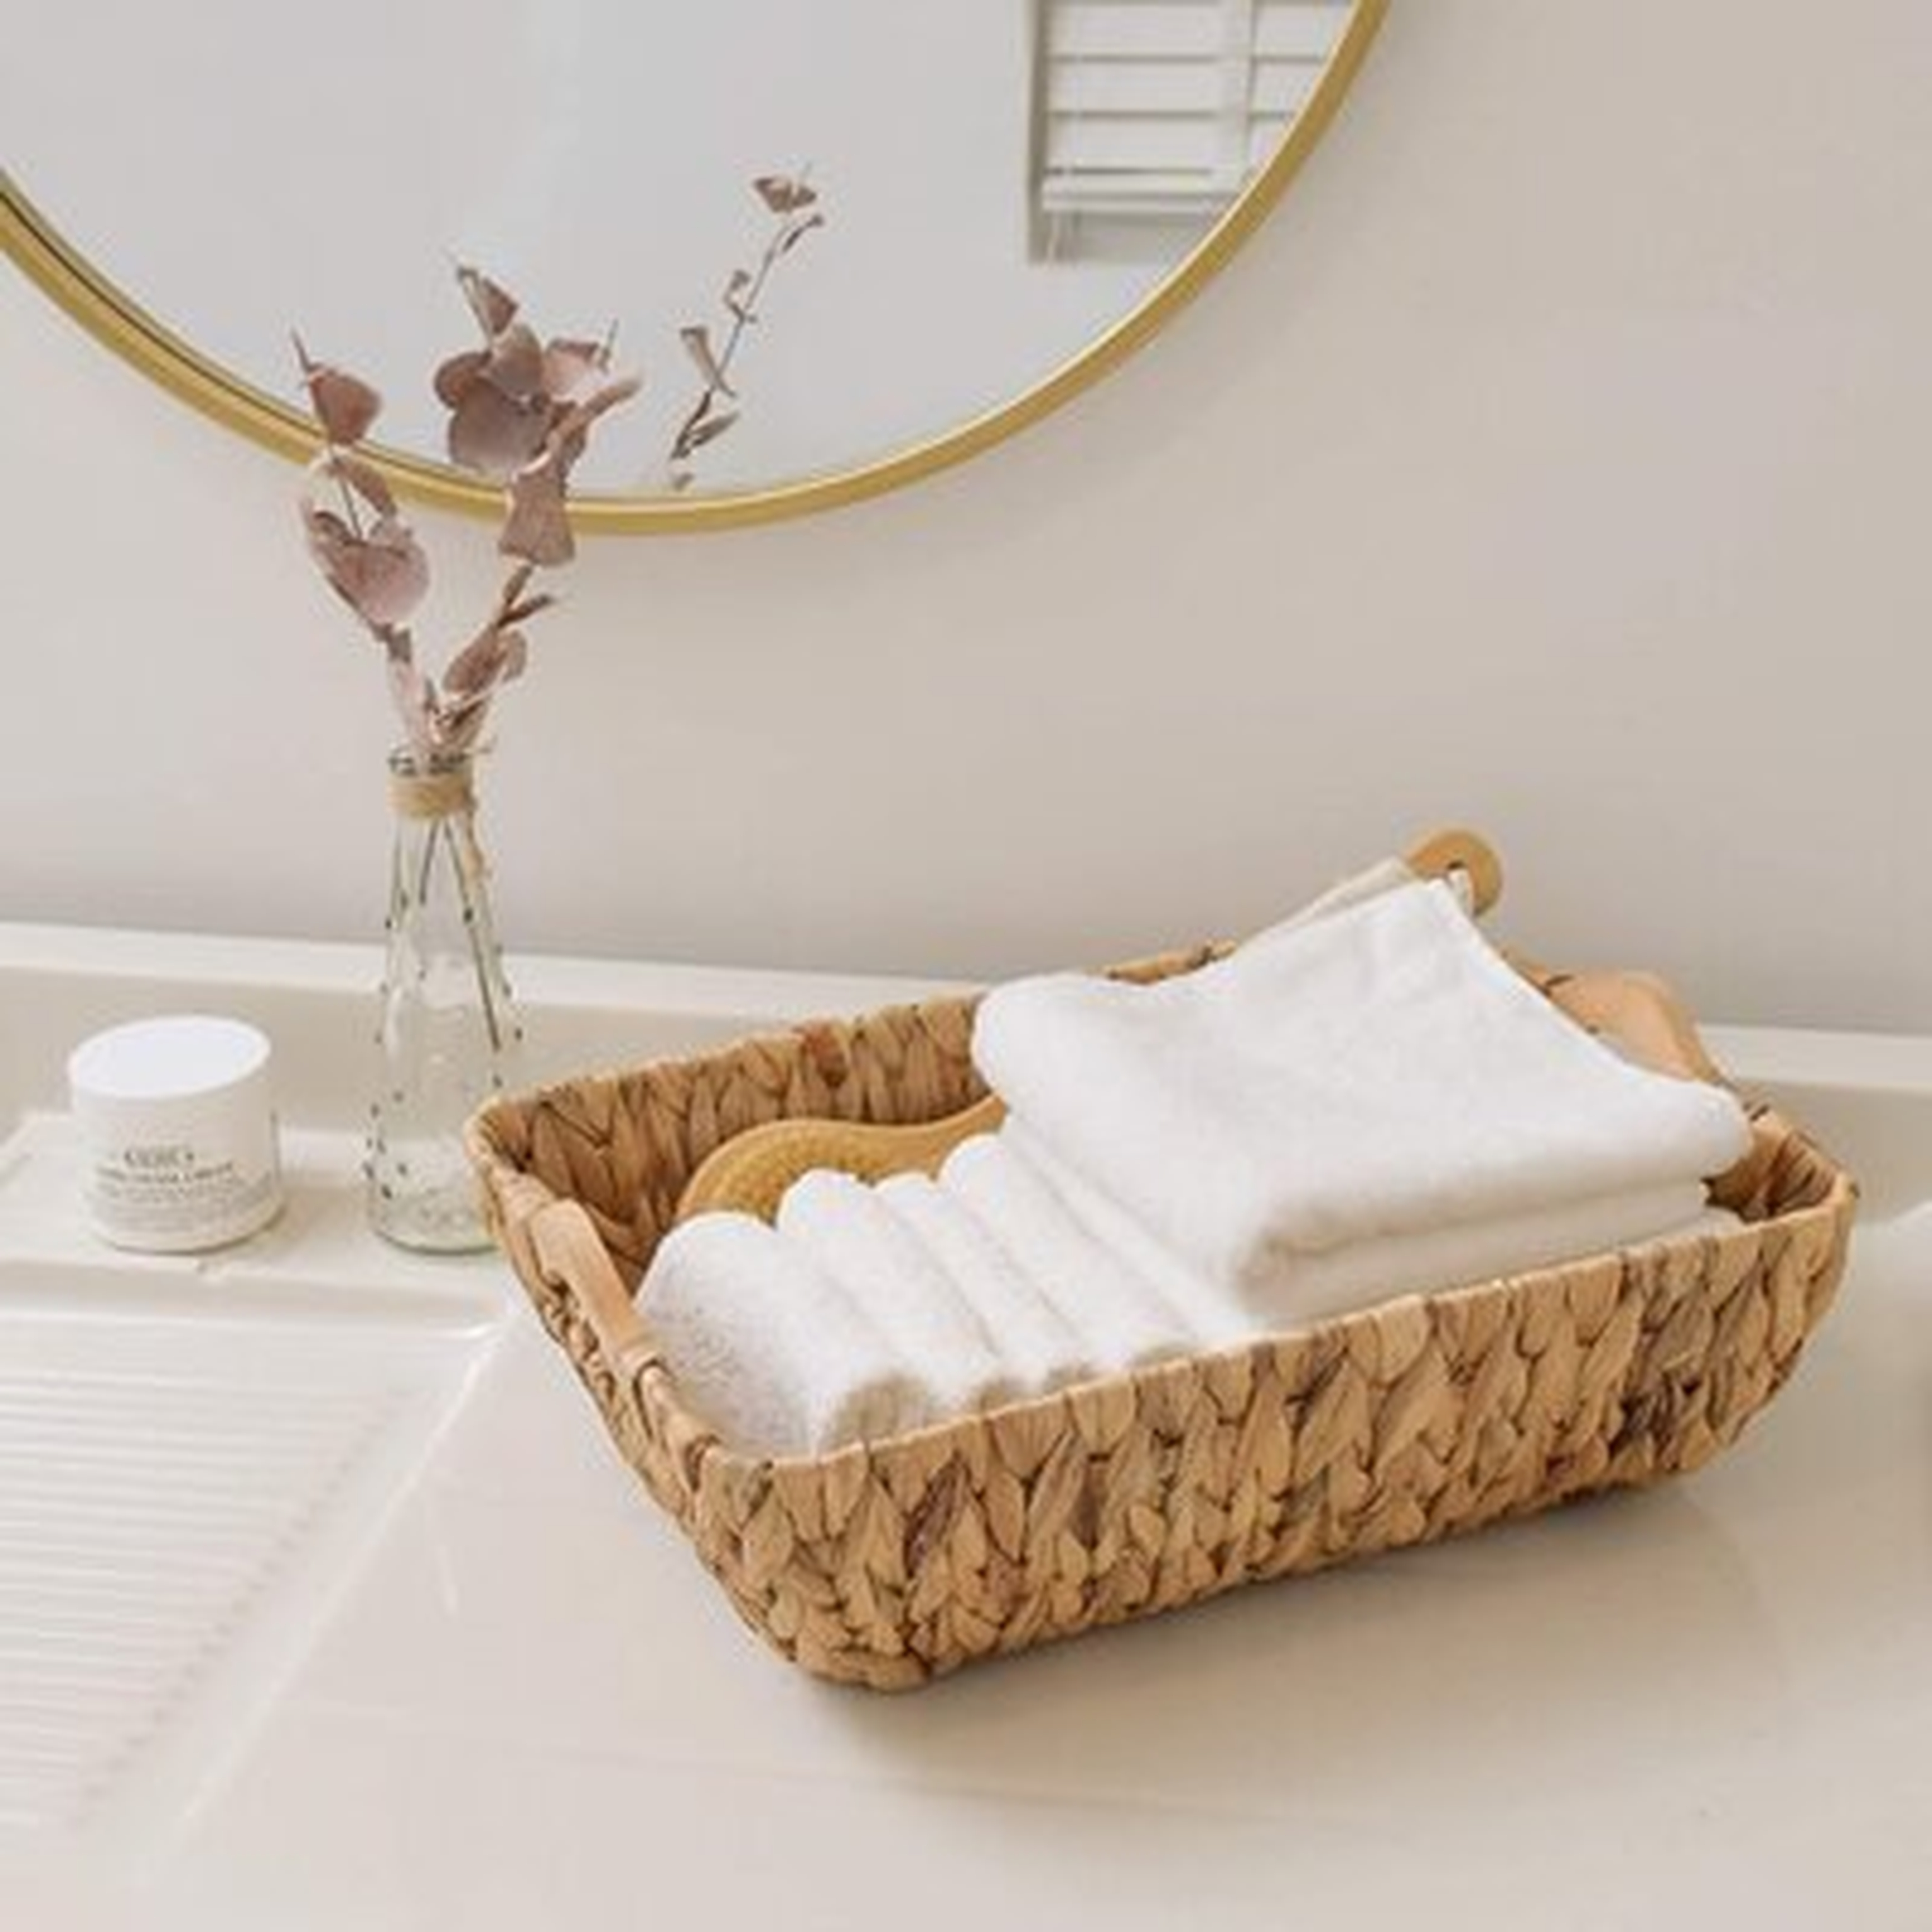 Large Hand-Woven Storage Basket With Wooden Handle, Wicker Basket For Finishing, 2 Pieces - Wayfair